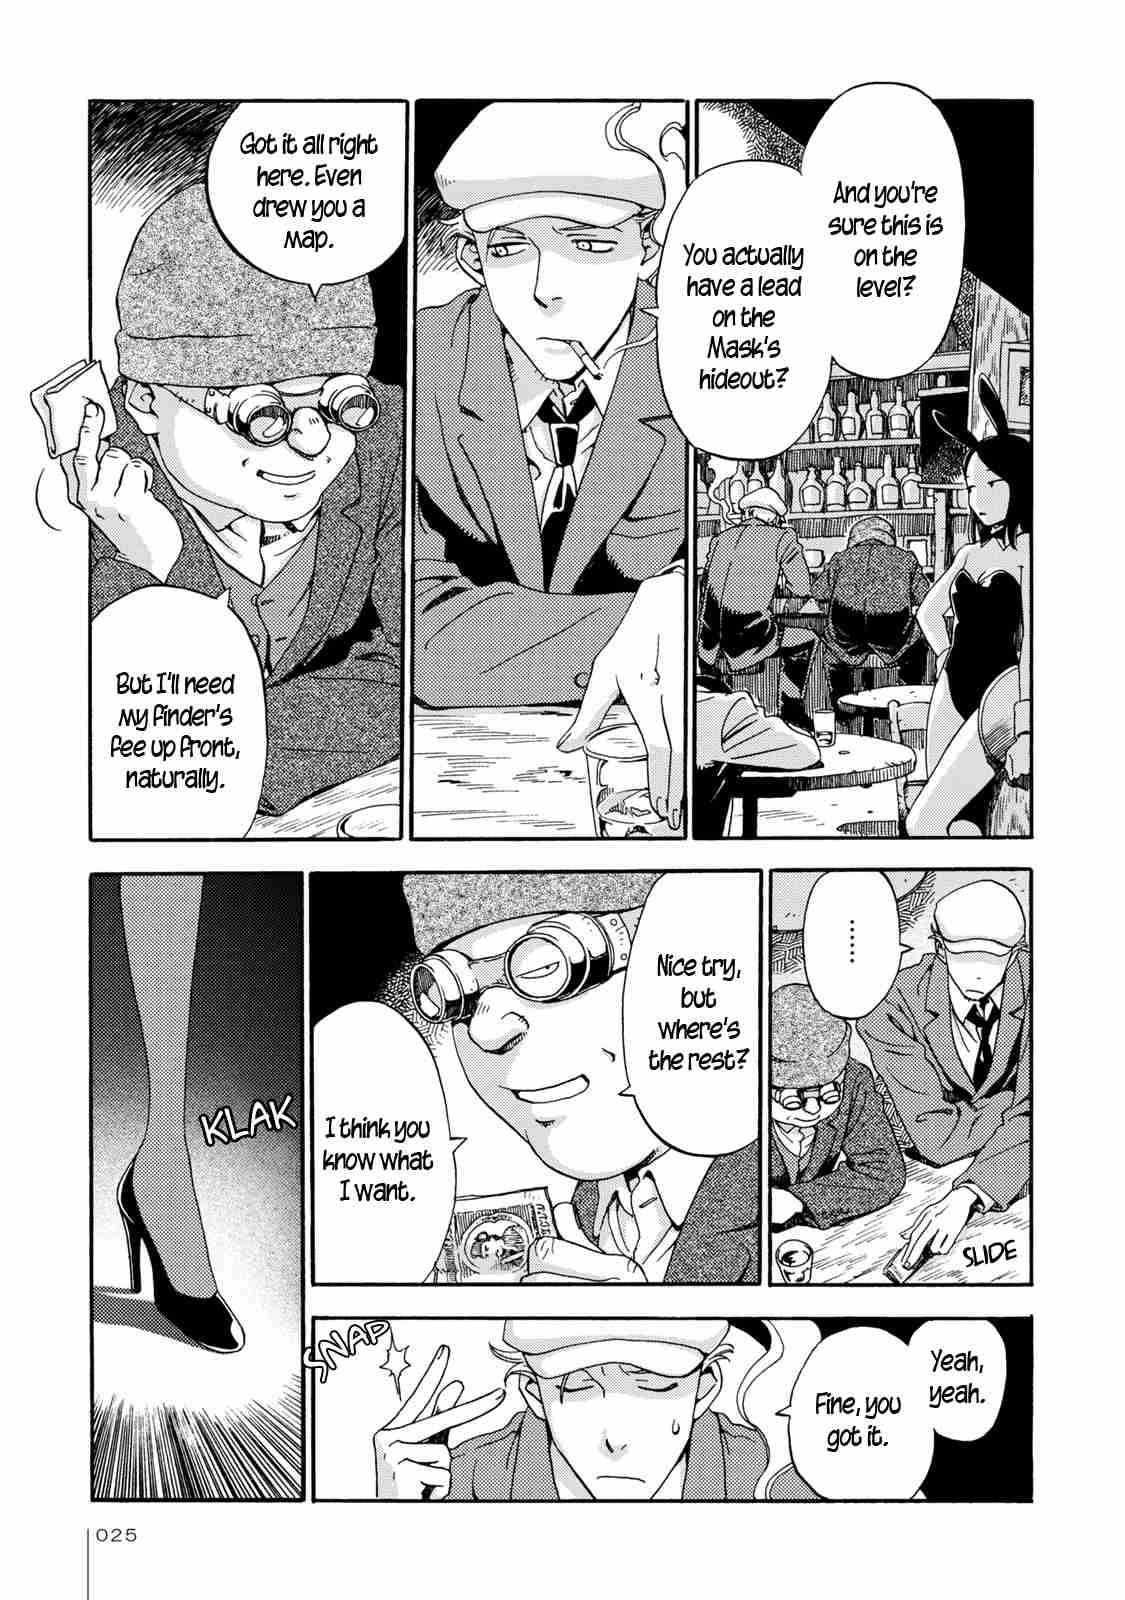 The Adventures of Totoko, Investigative Reporter Vol. 1 Ch. 2 A Surprising Lead, and The Black Valentine Plot